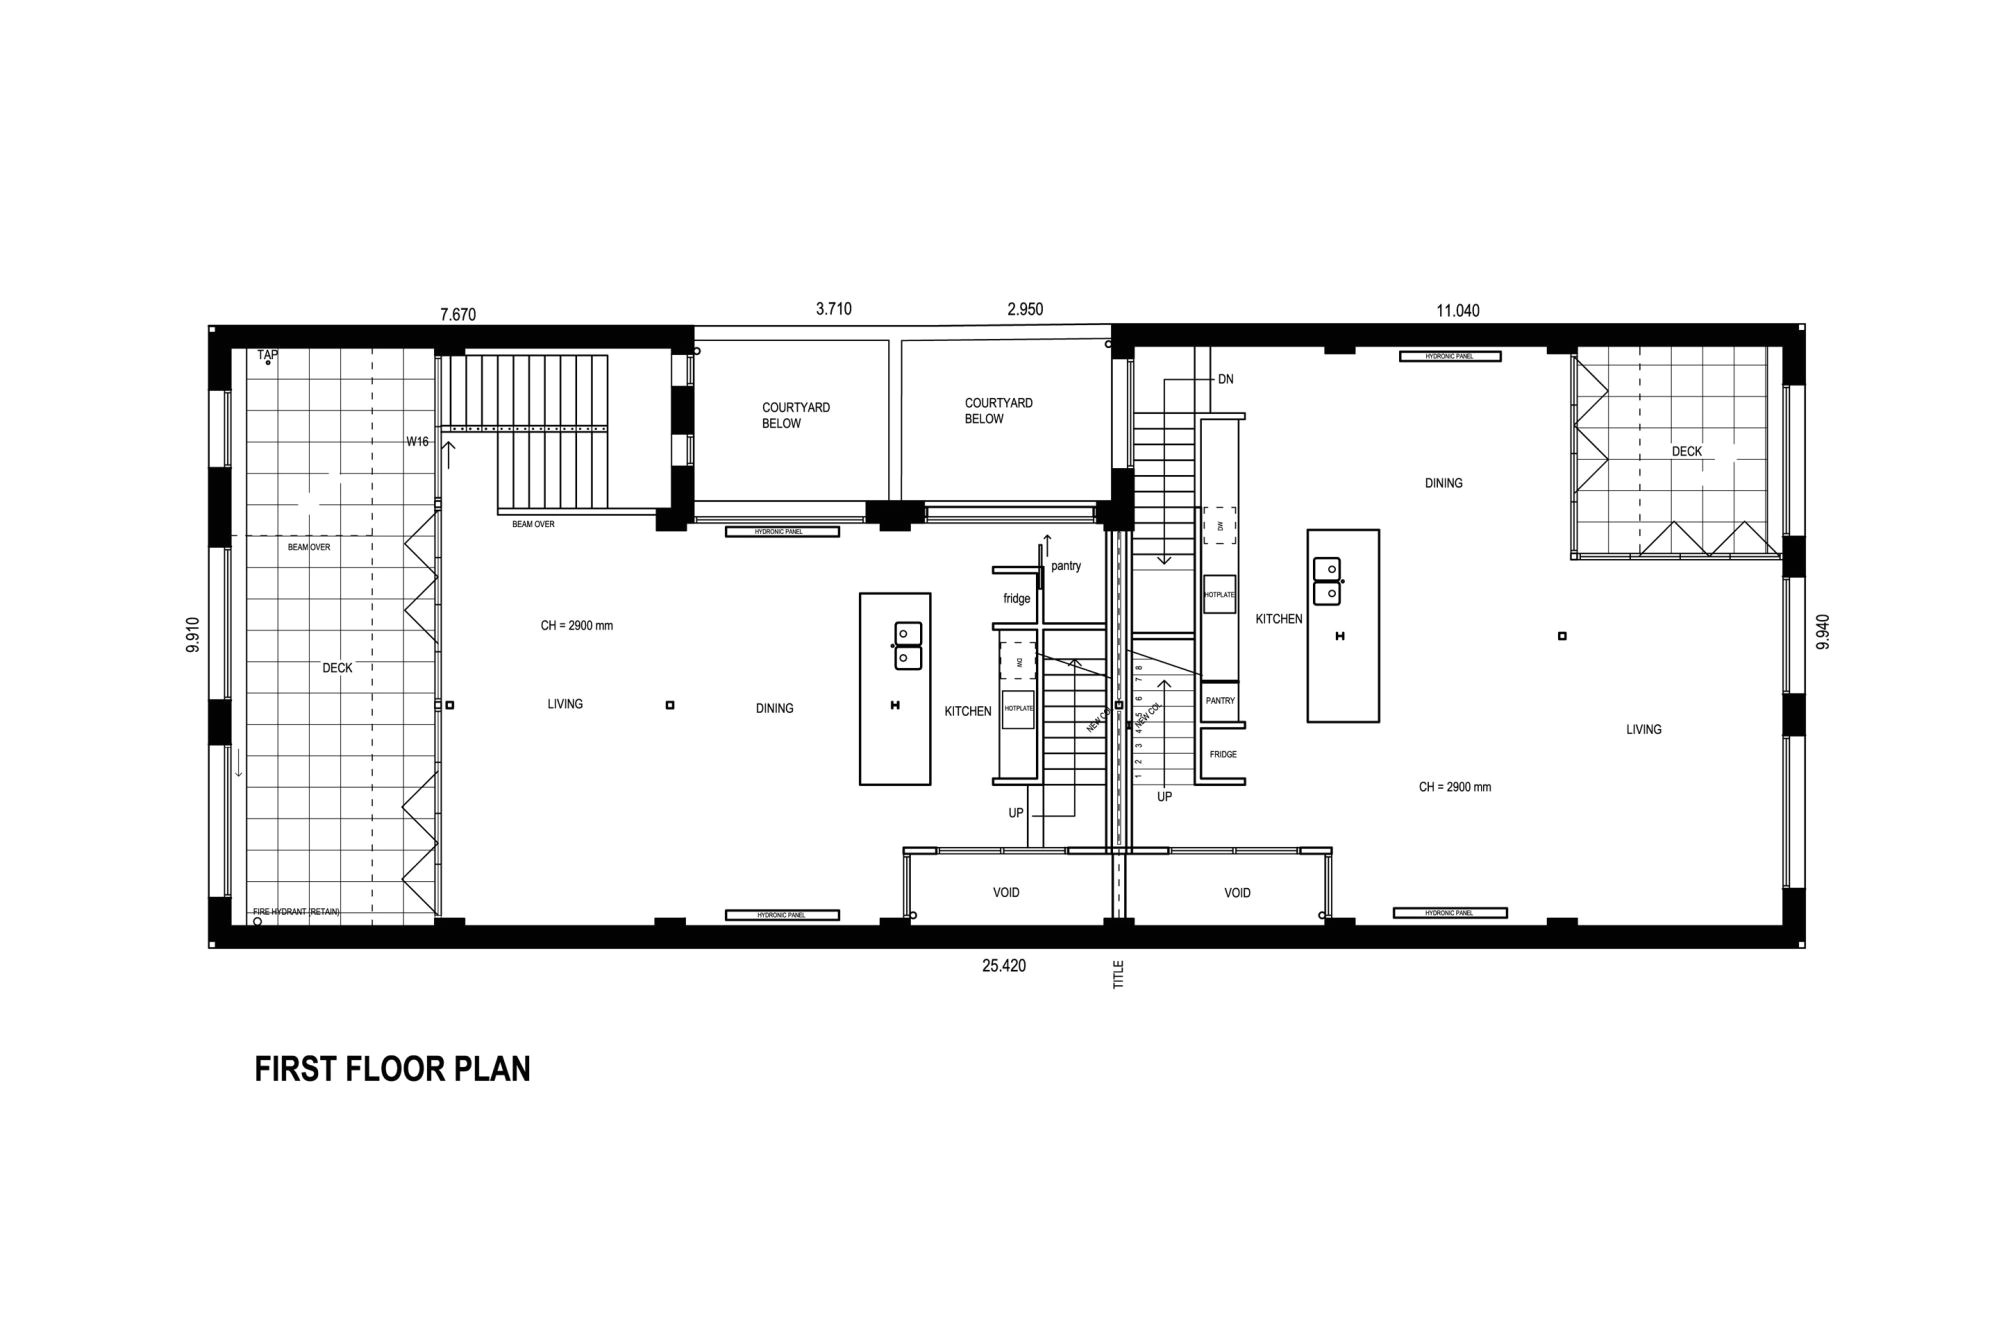 Warehouse Style House Plans Warehouse Homes Floor Plans